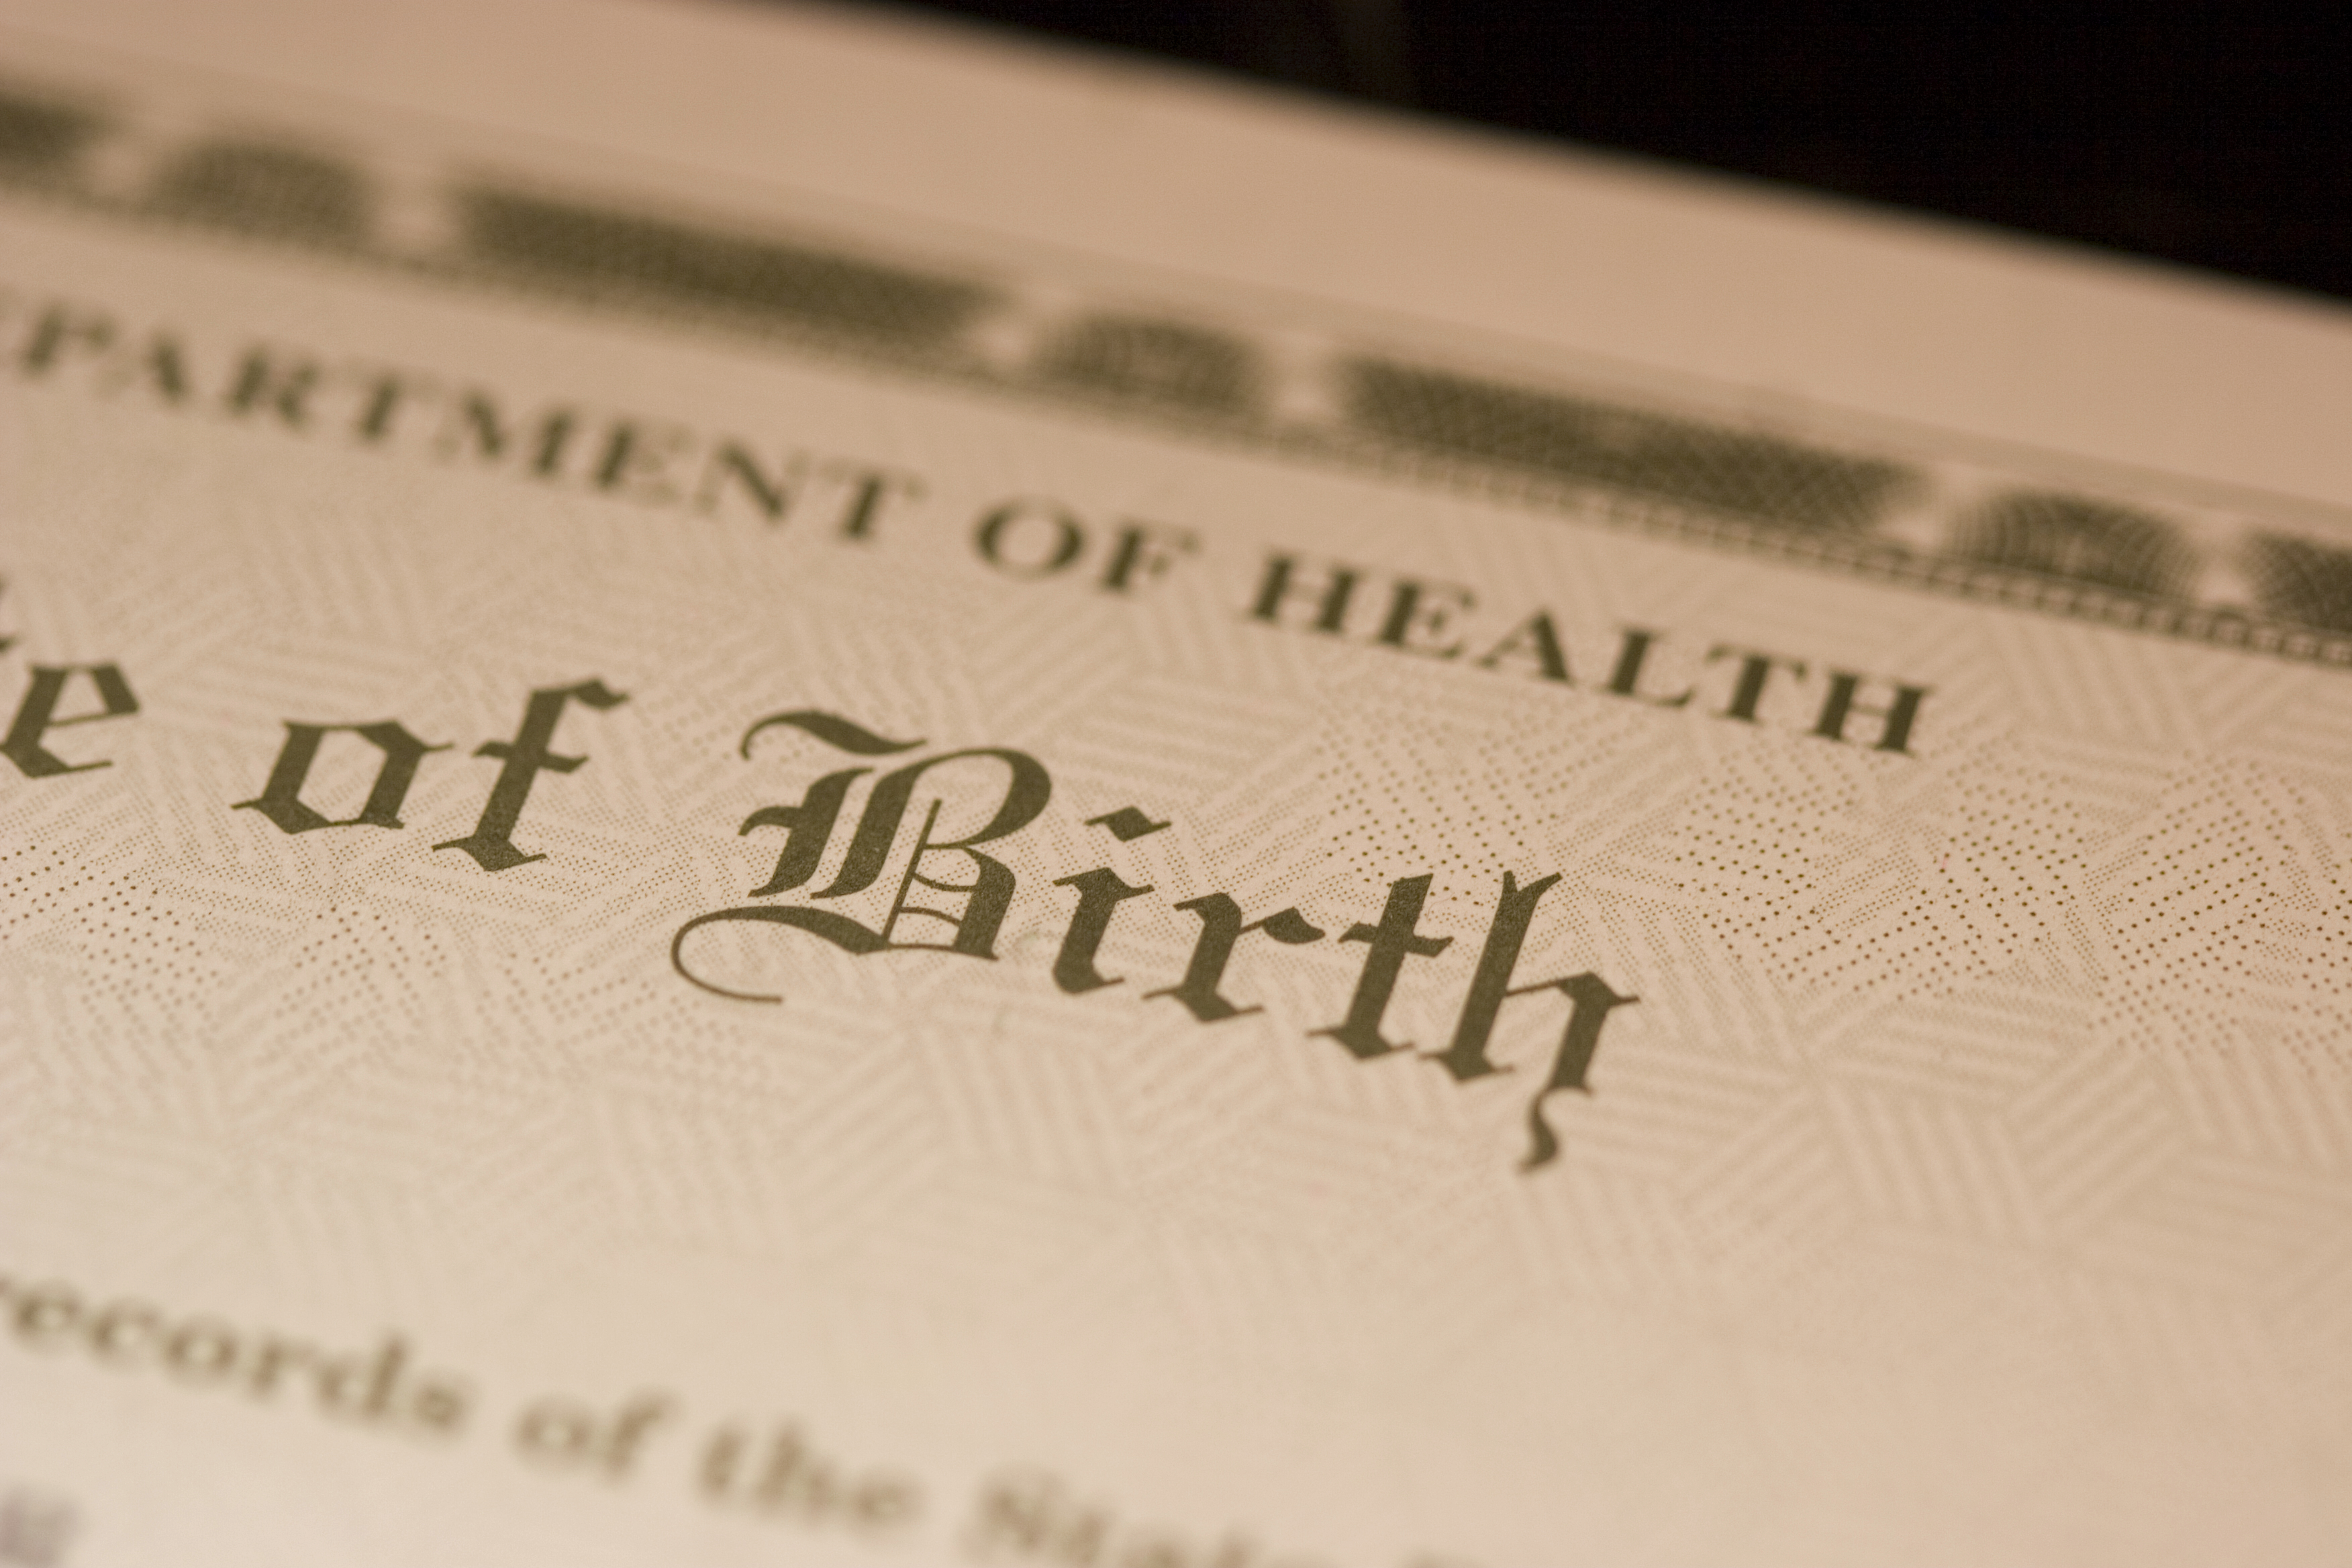 Birth certificate attestation – Attestation to authenticate ...